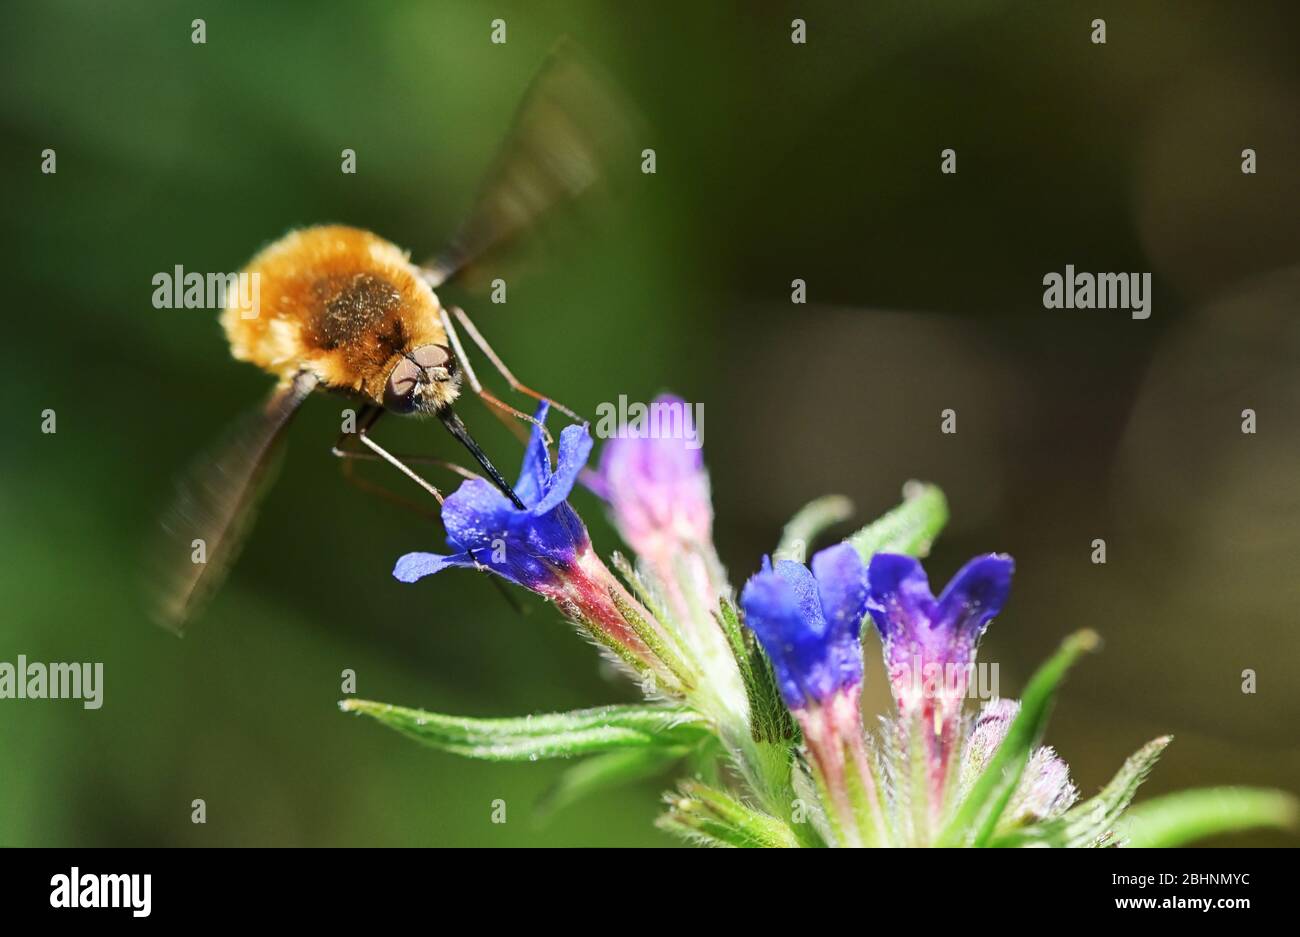 Large Bee Fly (Bombylius Major) Sucking Nectar From A Flower Stock Photo